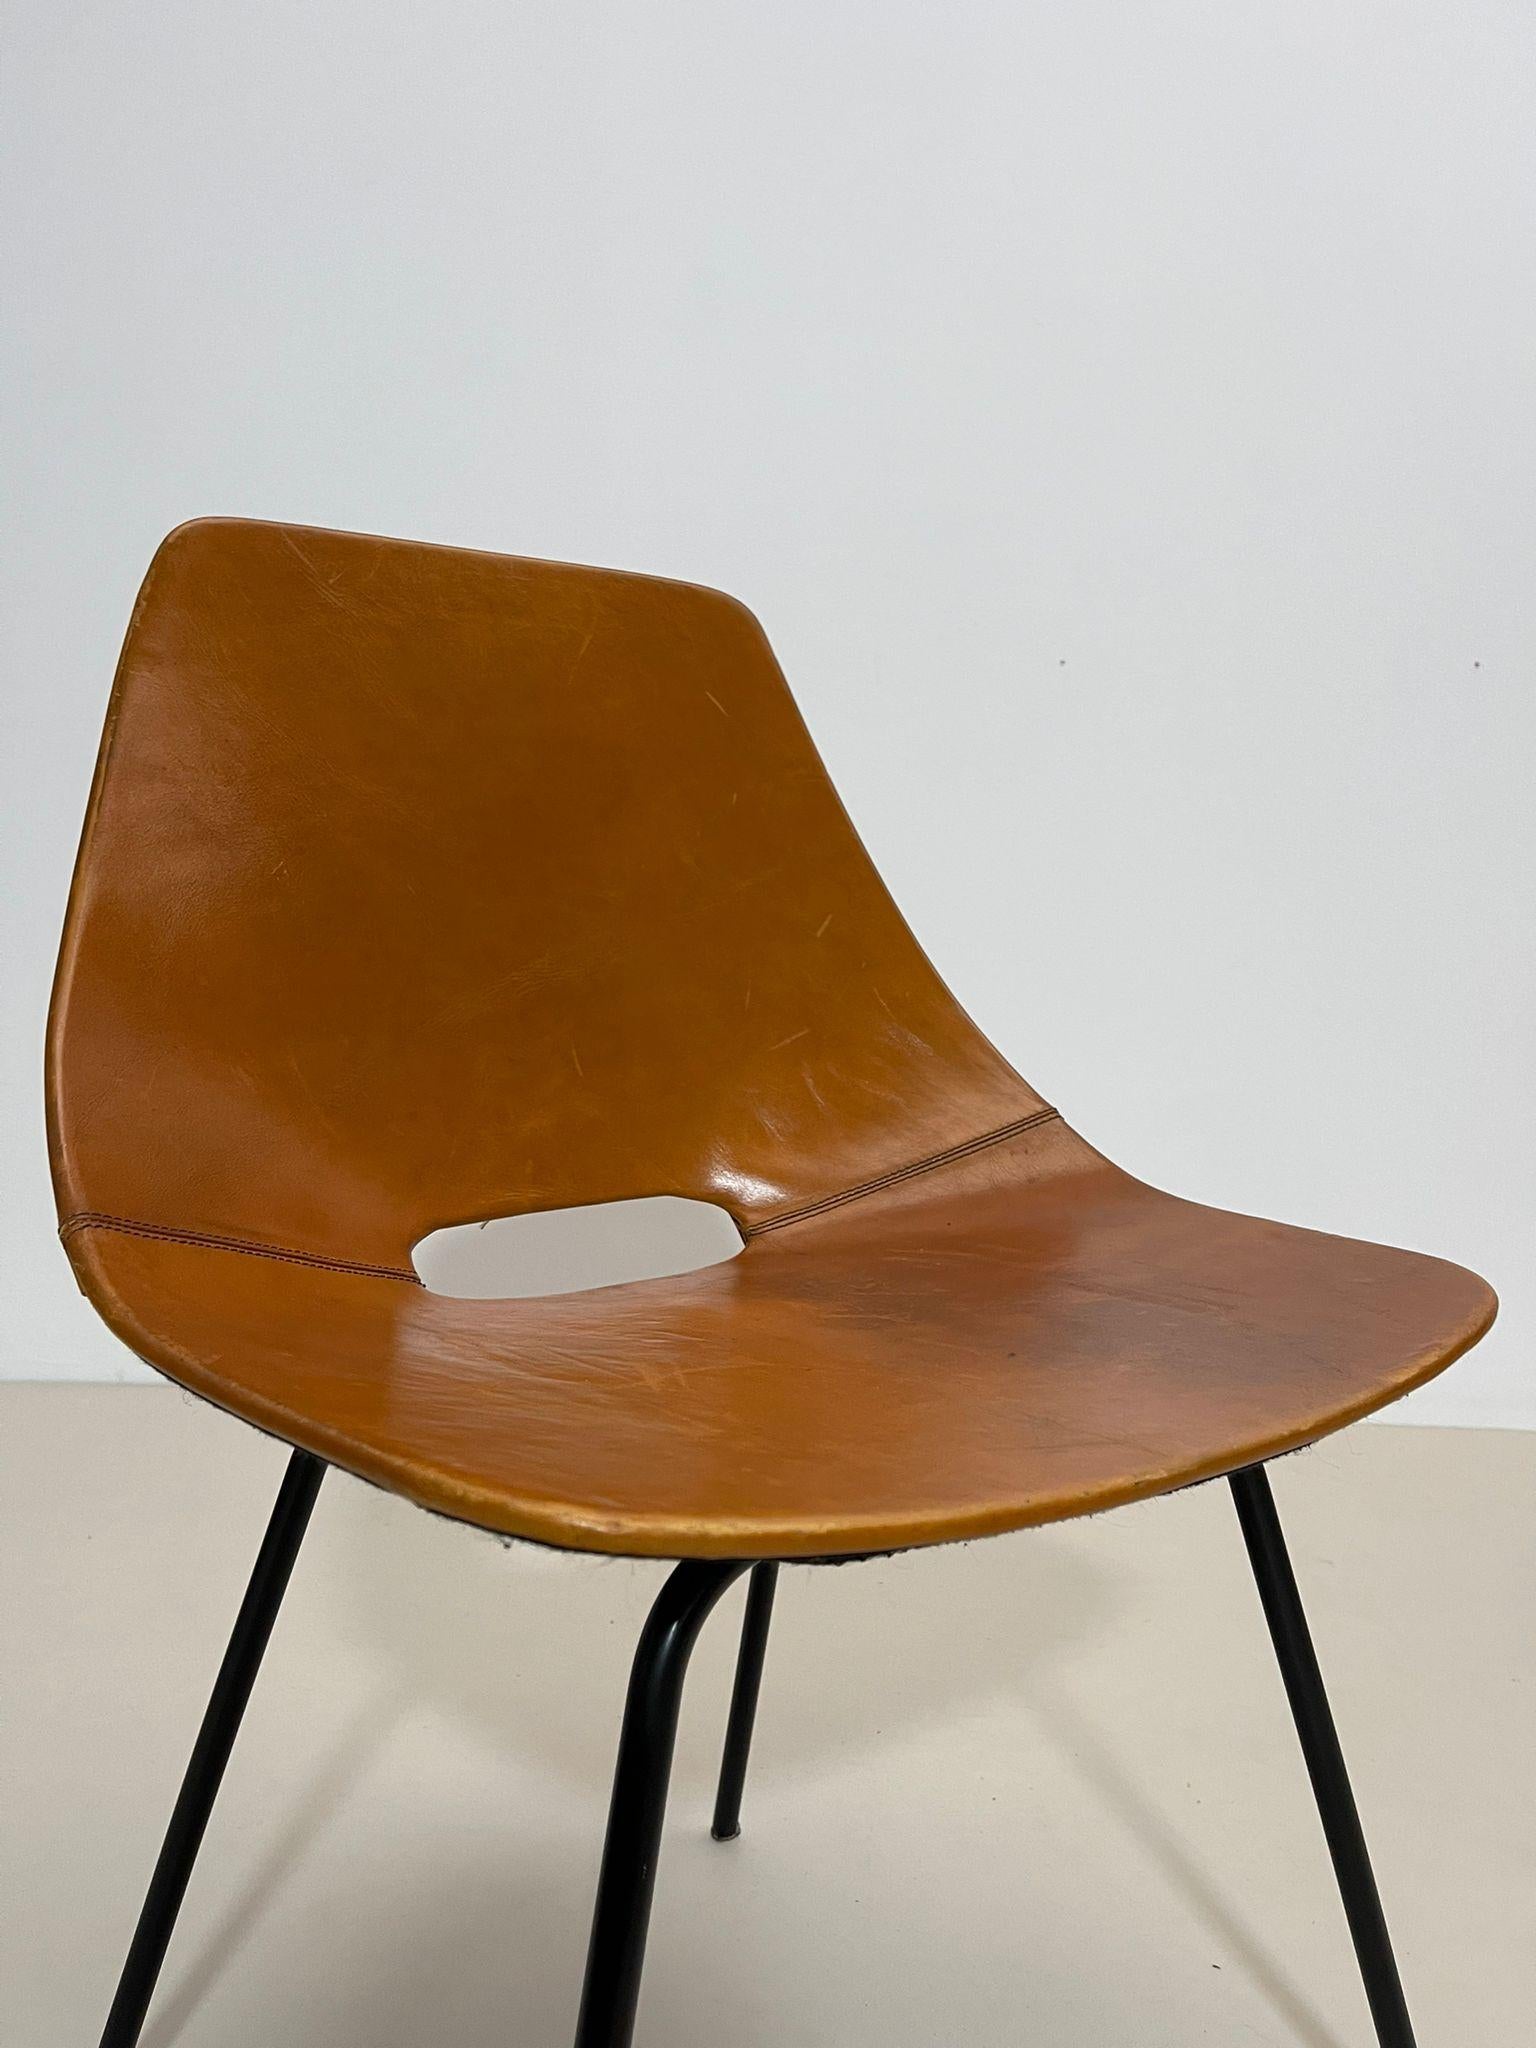 Set of 6 leather Tonneau chairs by Pierre Guariche, 1950s.